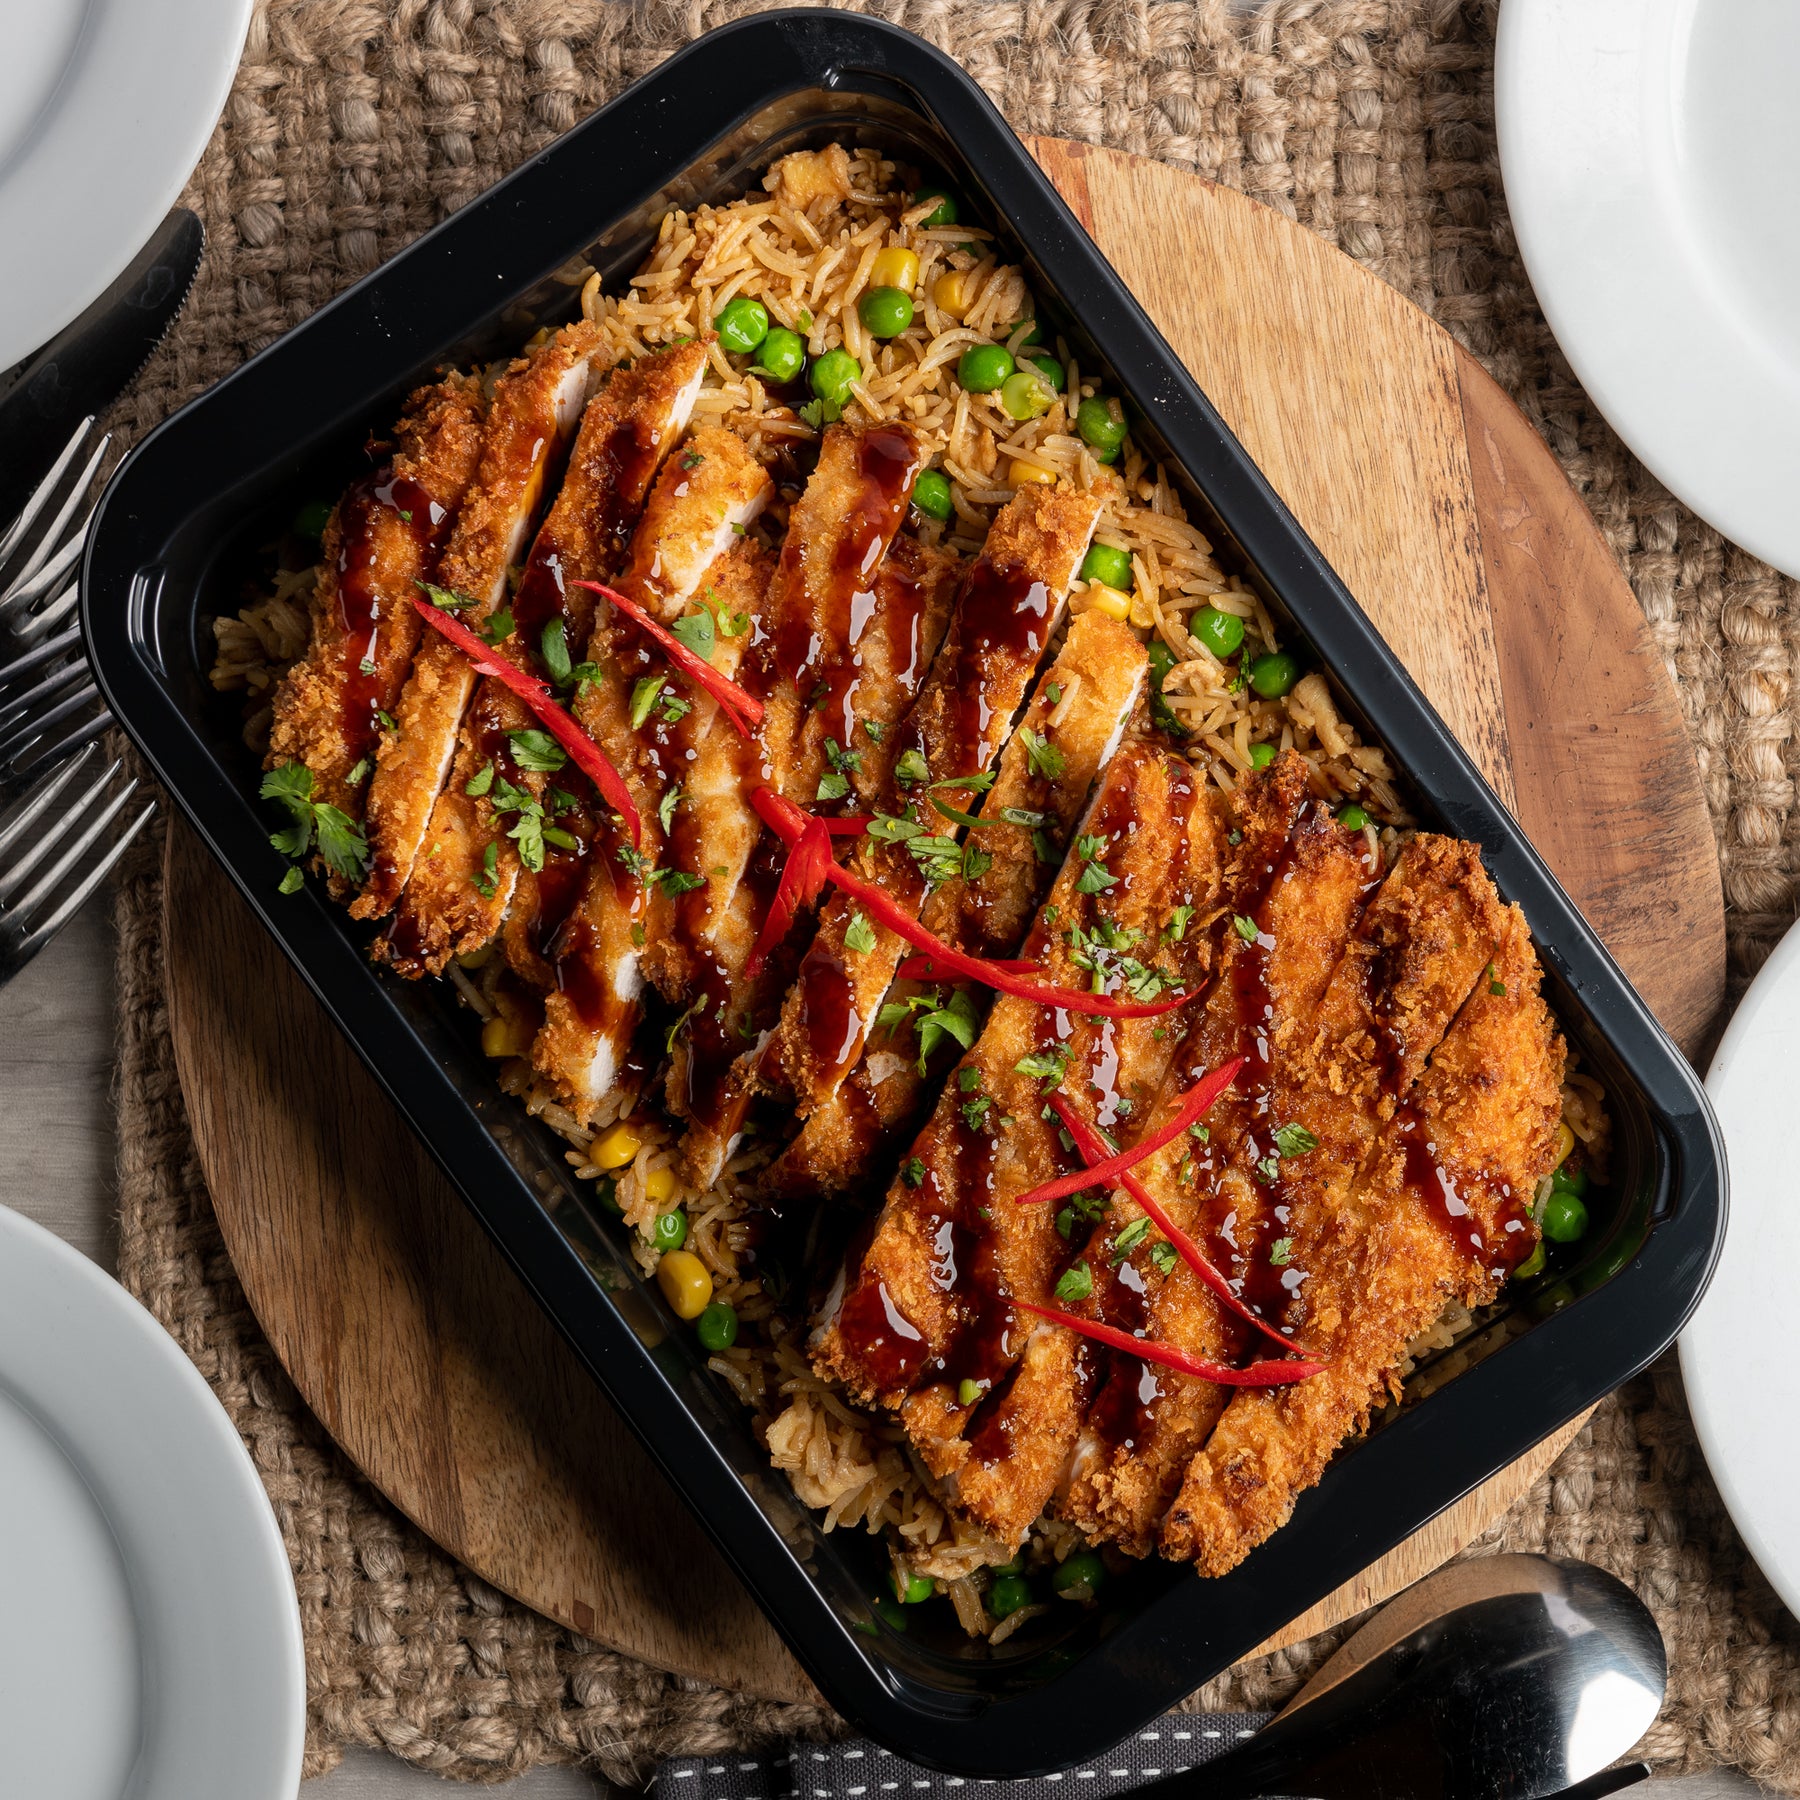 Chicken Katsu on rice 4 serves fitfood meal box